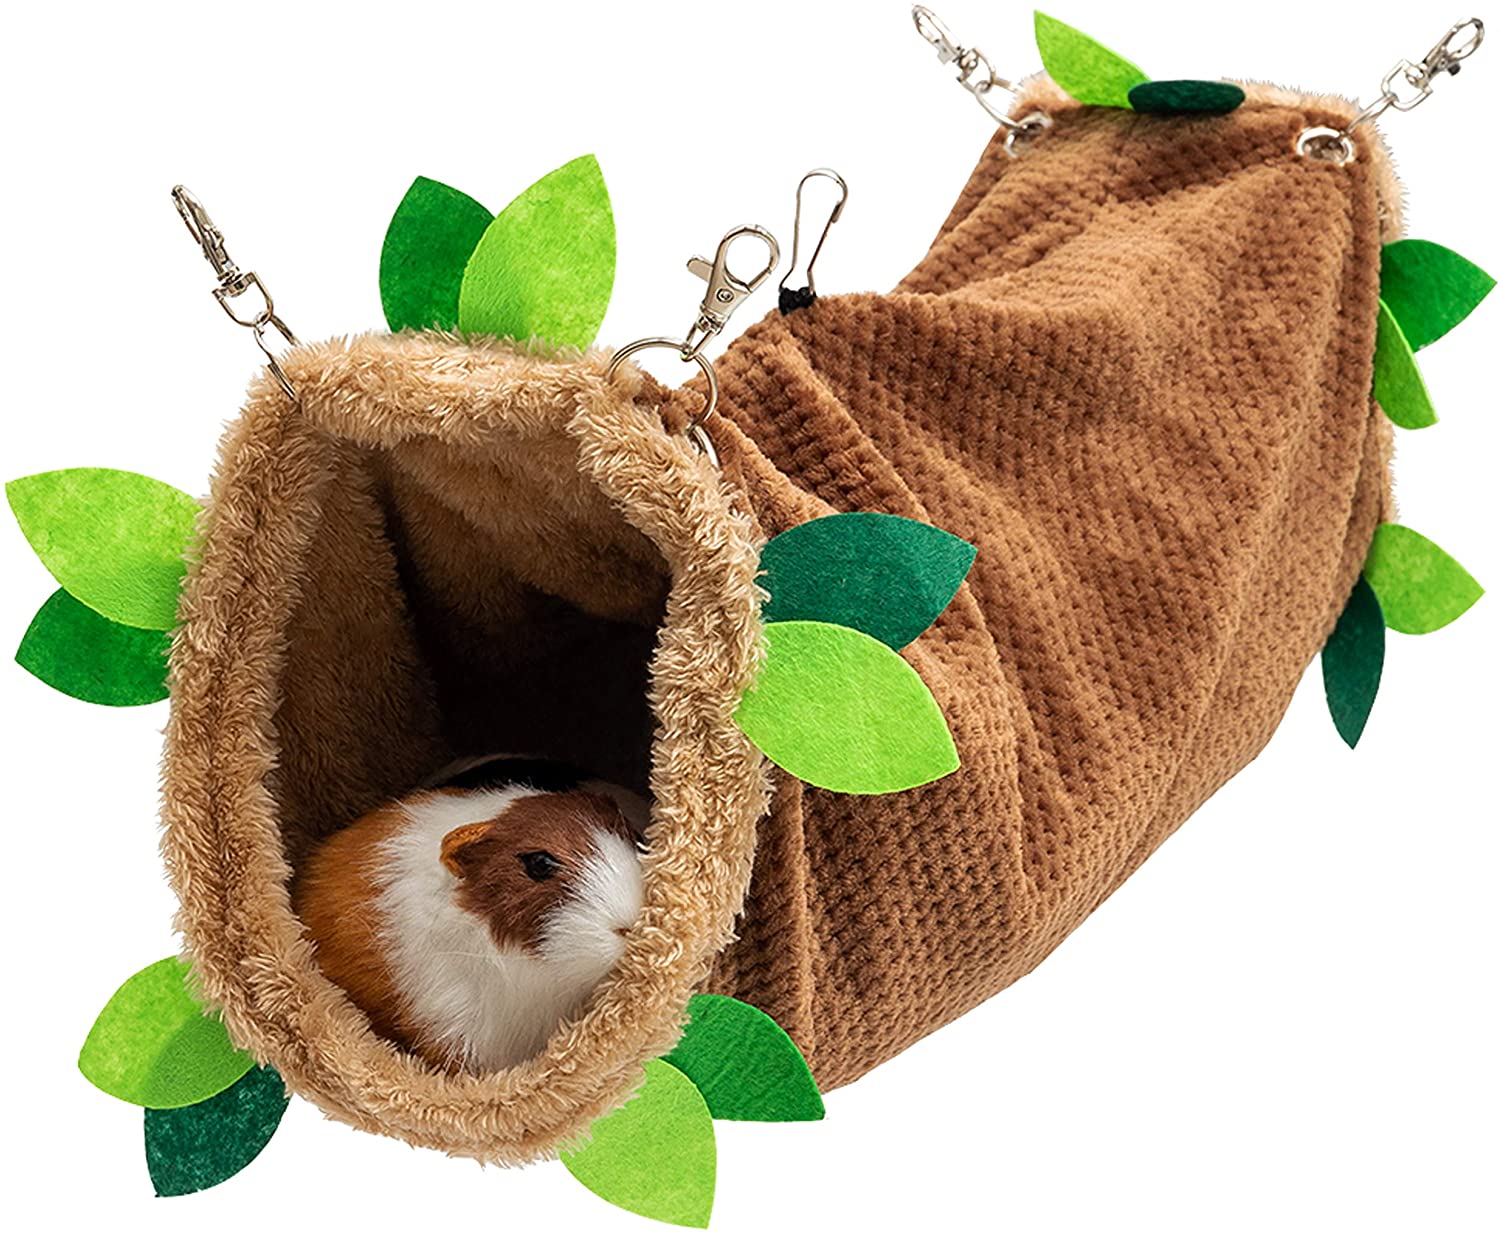 Hamiledyi Hamster Hammock Sugar Glider Cage Accessories Bedding Hanging Tunnel Swing Fleece Bed for Guinea Pig Squirrel Rat Playing Sleeping,2 Pack 